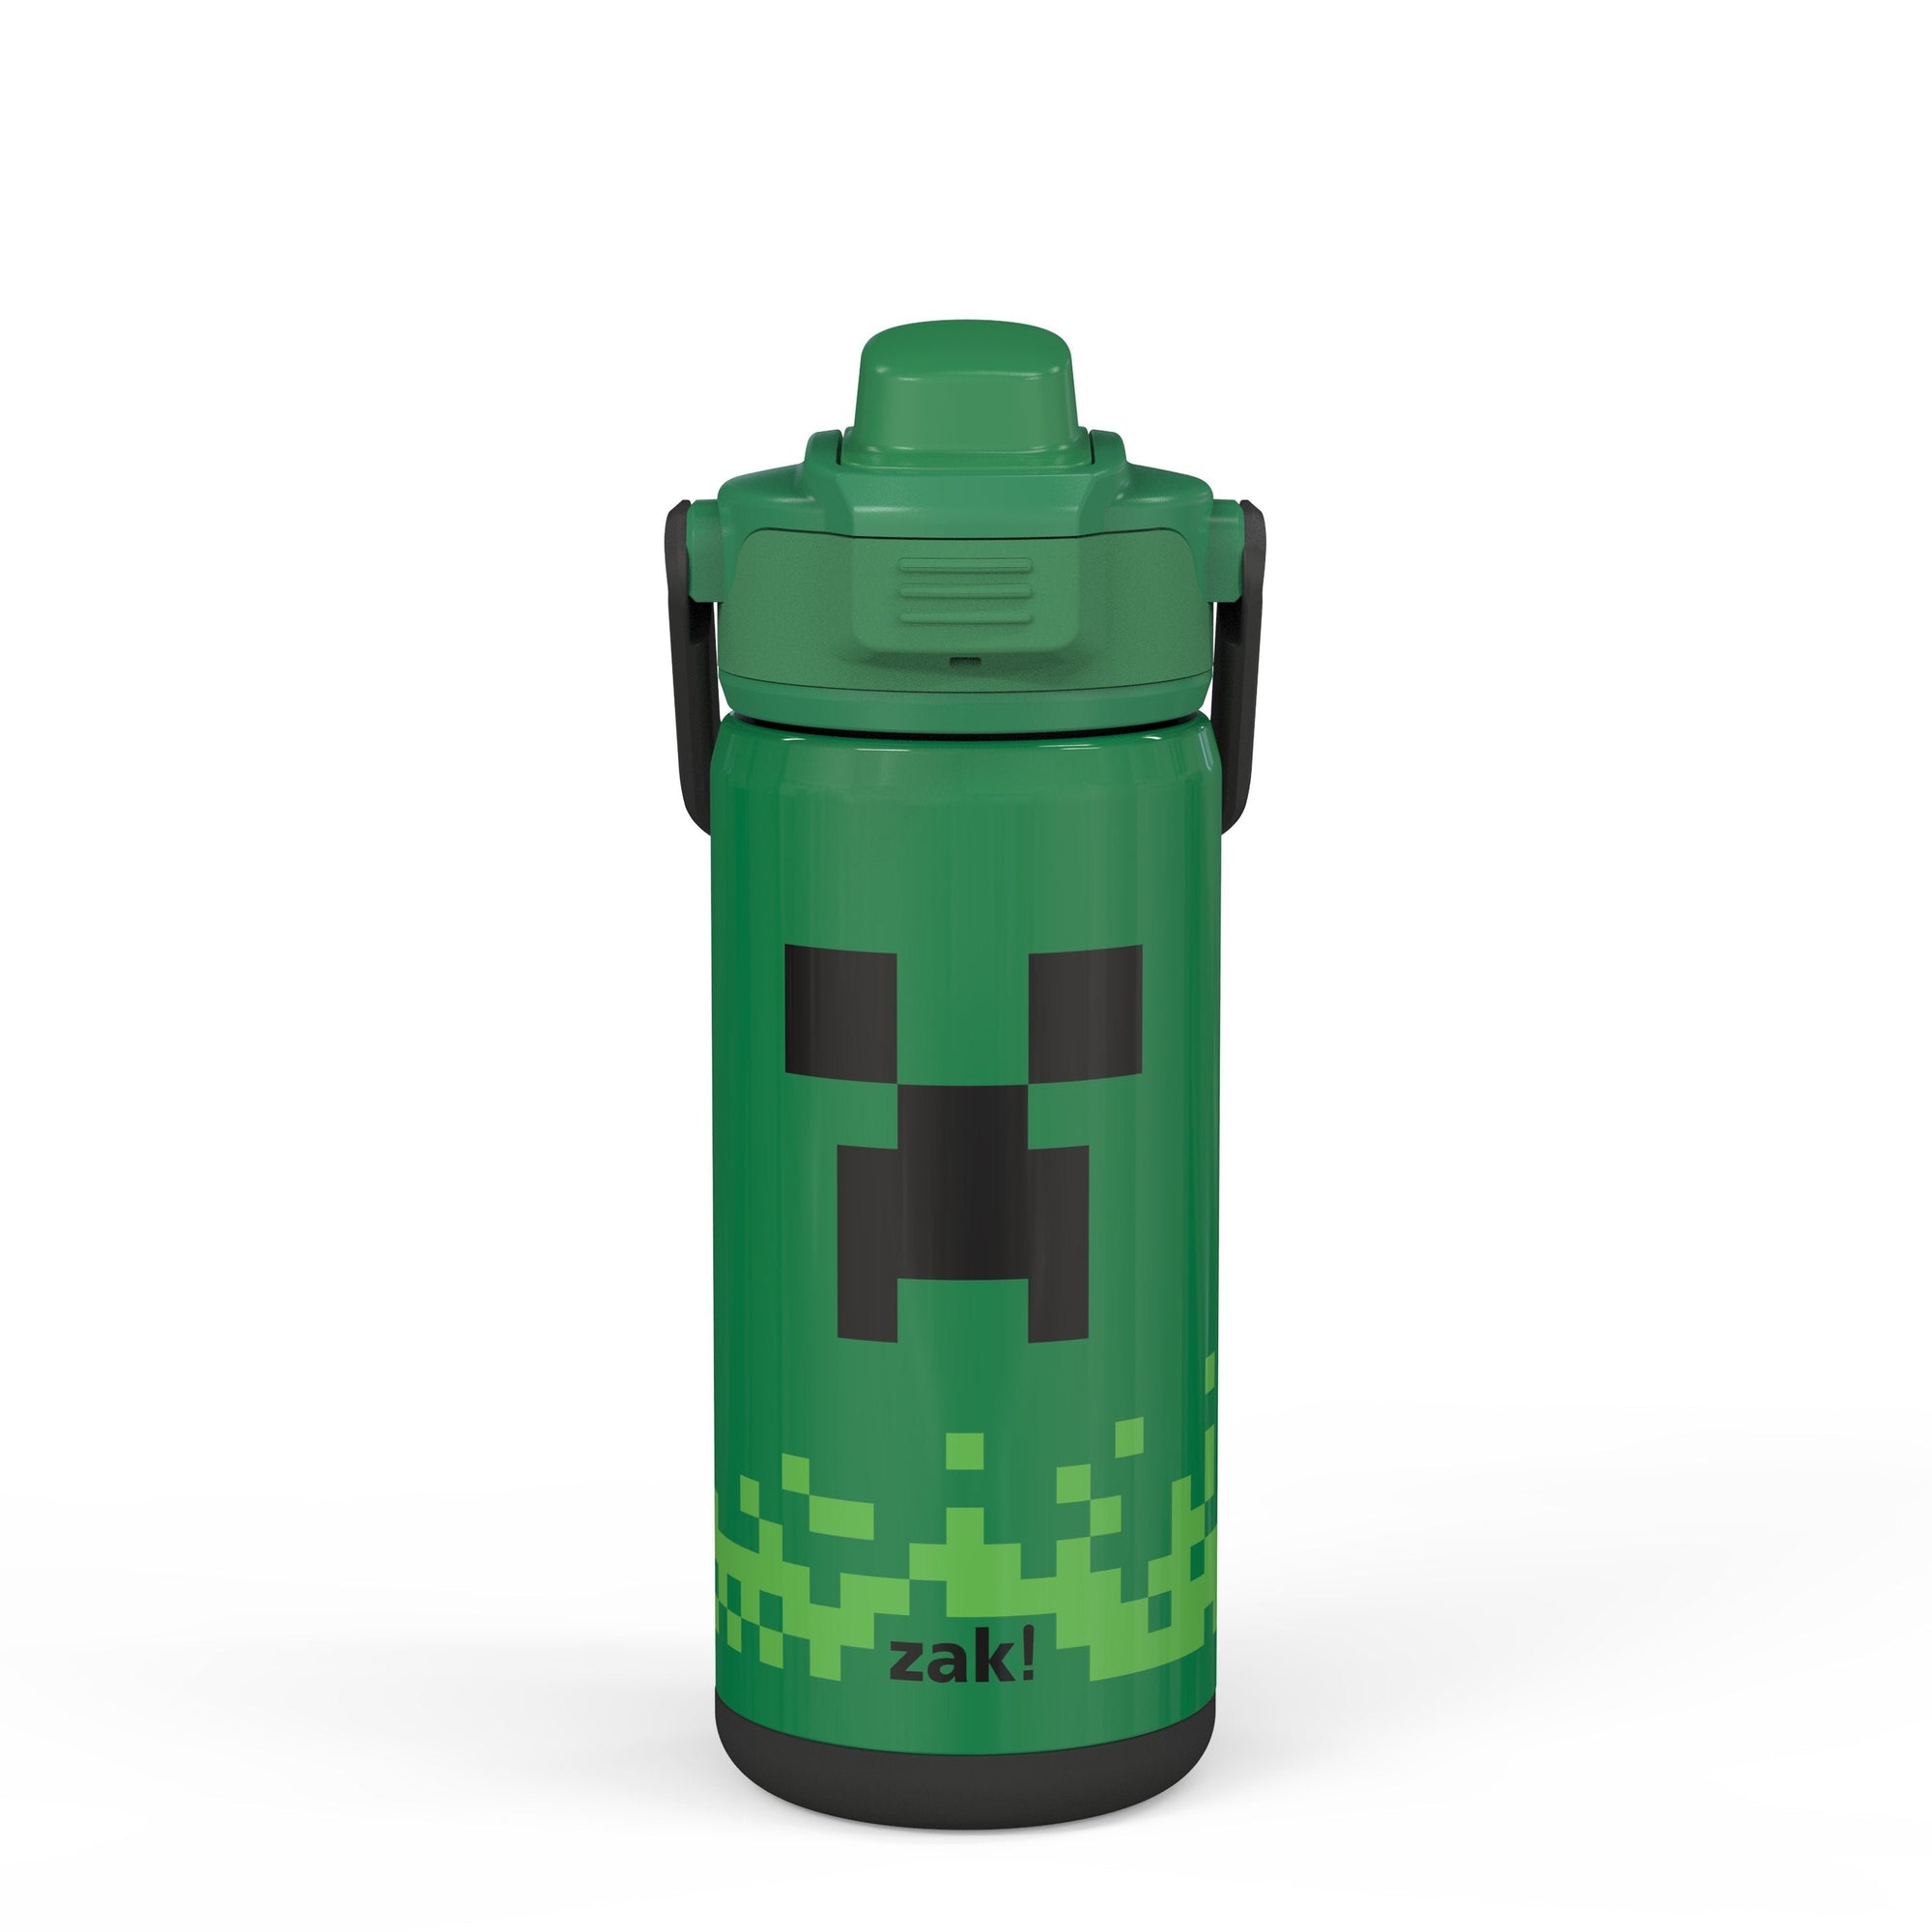 Minecraft Creeper Beacon Stainless Steel Insulated Kids Water Bottle with Covered Spout, 14 Ounces